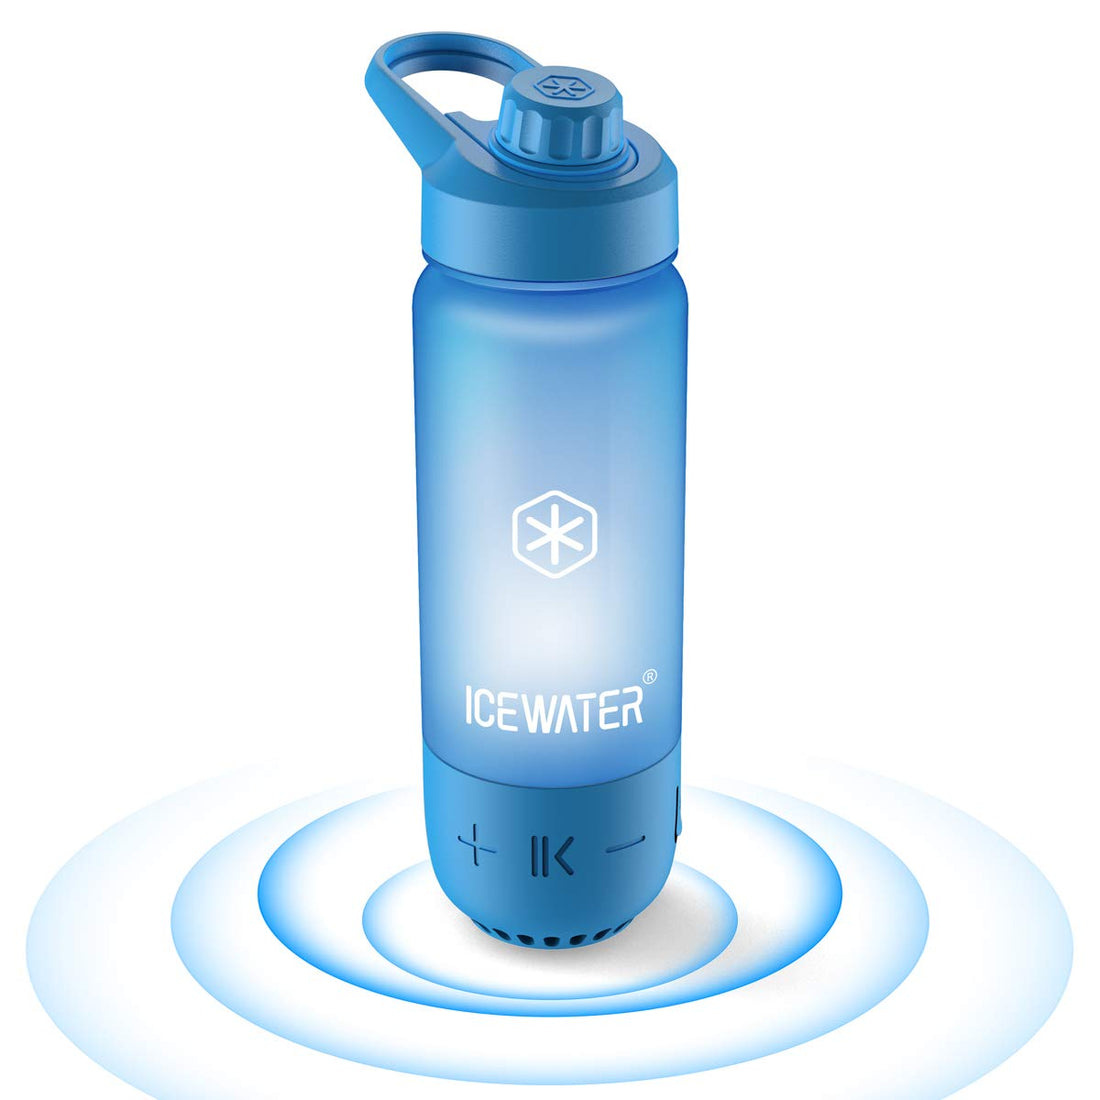 ICEWATER 3-in-1 Smart Water Bottle, Glows to Remind You to Keep Hydrated, Bluetooth Speaker & Dancing Lights, Plastic Water Bottle With Soft Auto Straw Lid, Great Gift (20 oz, Blue)